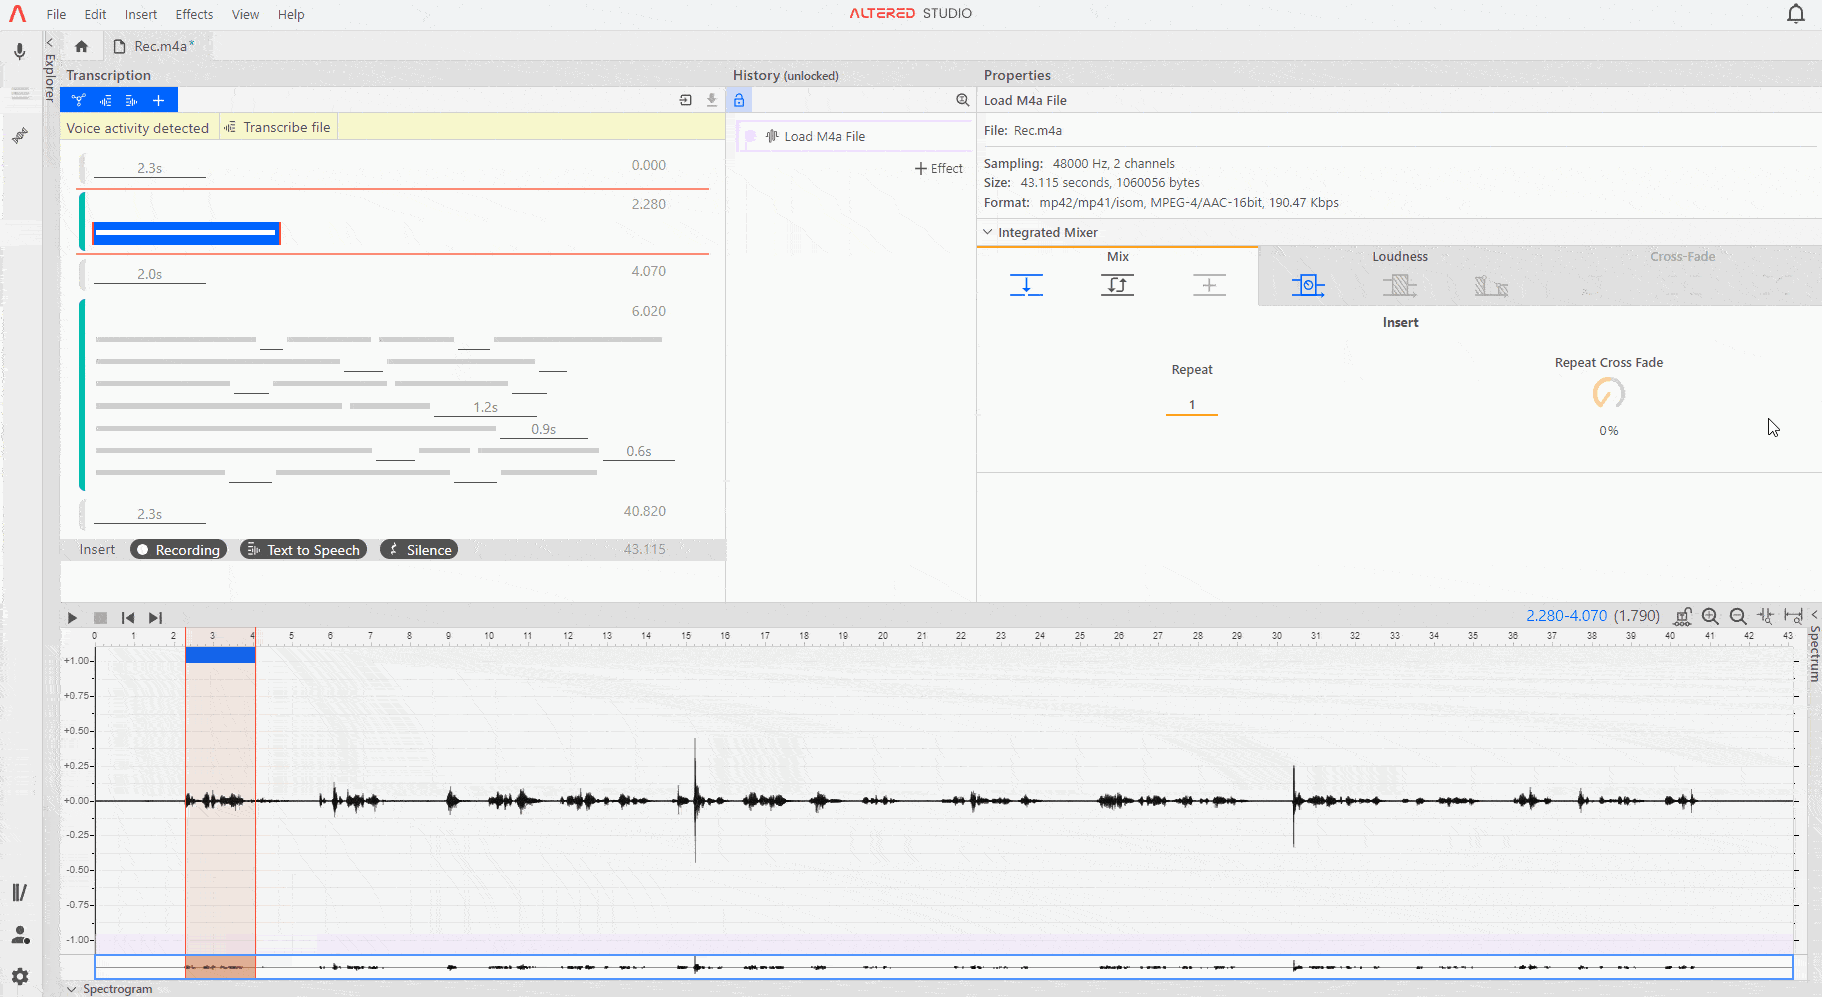 How do I add transcripts for narration or audio snippets